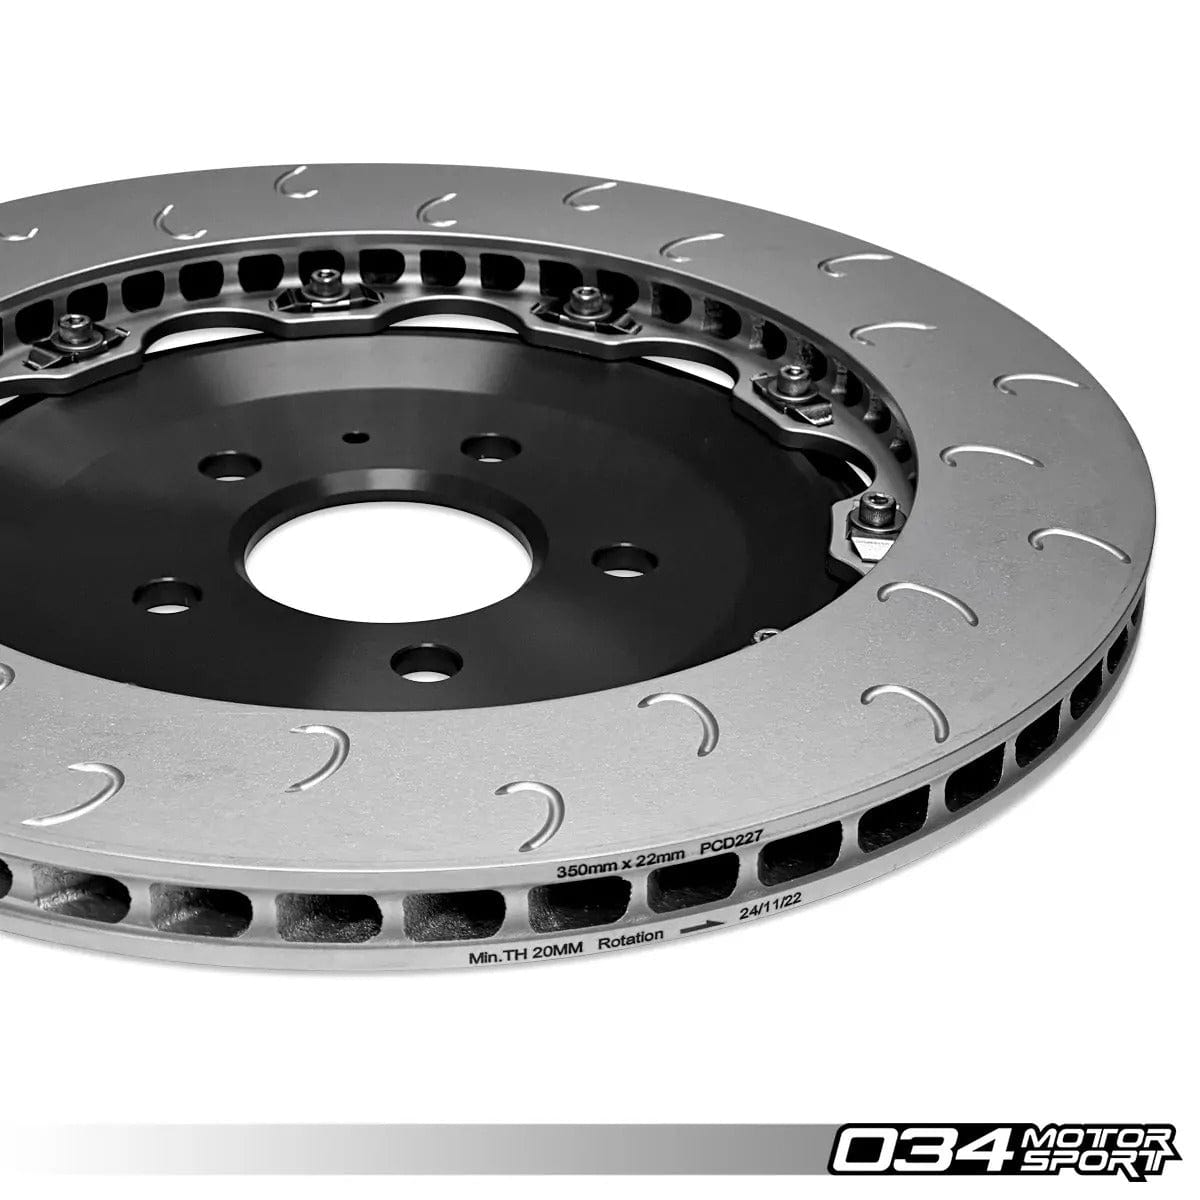 034 Motorsport 2-Piece Floating Rear Brake Rotor Upgrade Kit (350x22mm)- Audi / C7 / S6 / S7 / RS6 / RS7 / D4 / A8 / S8